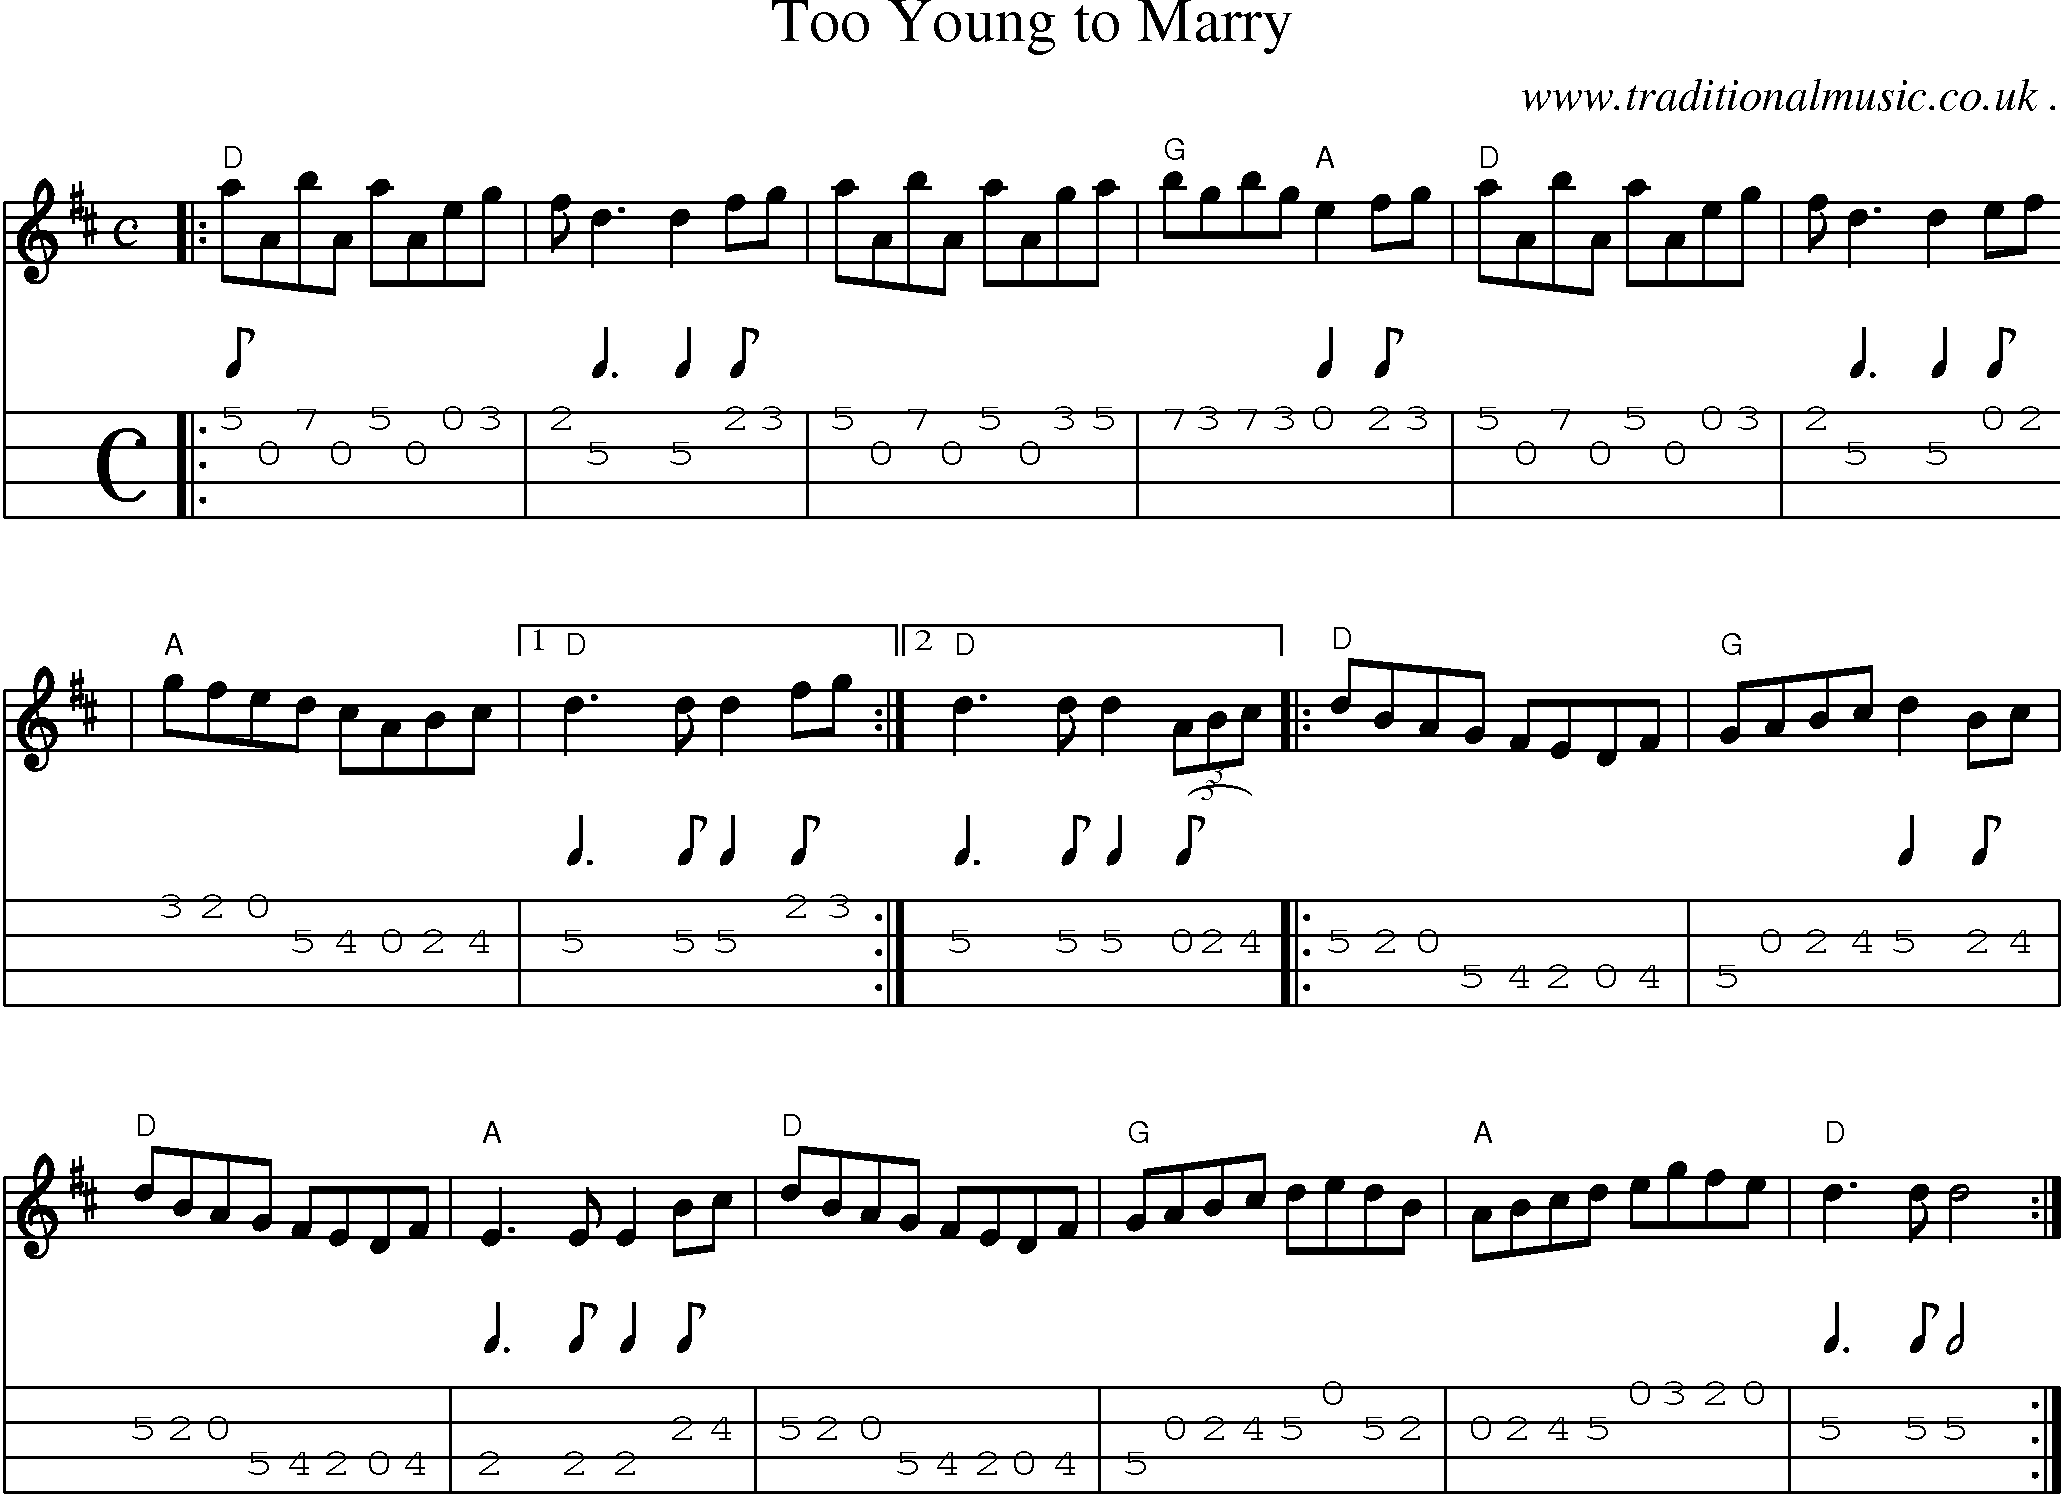 Sheet-music  score, Chords and Mandolin Tabs for Too Young To Marry